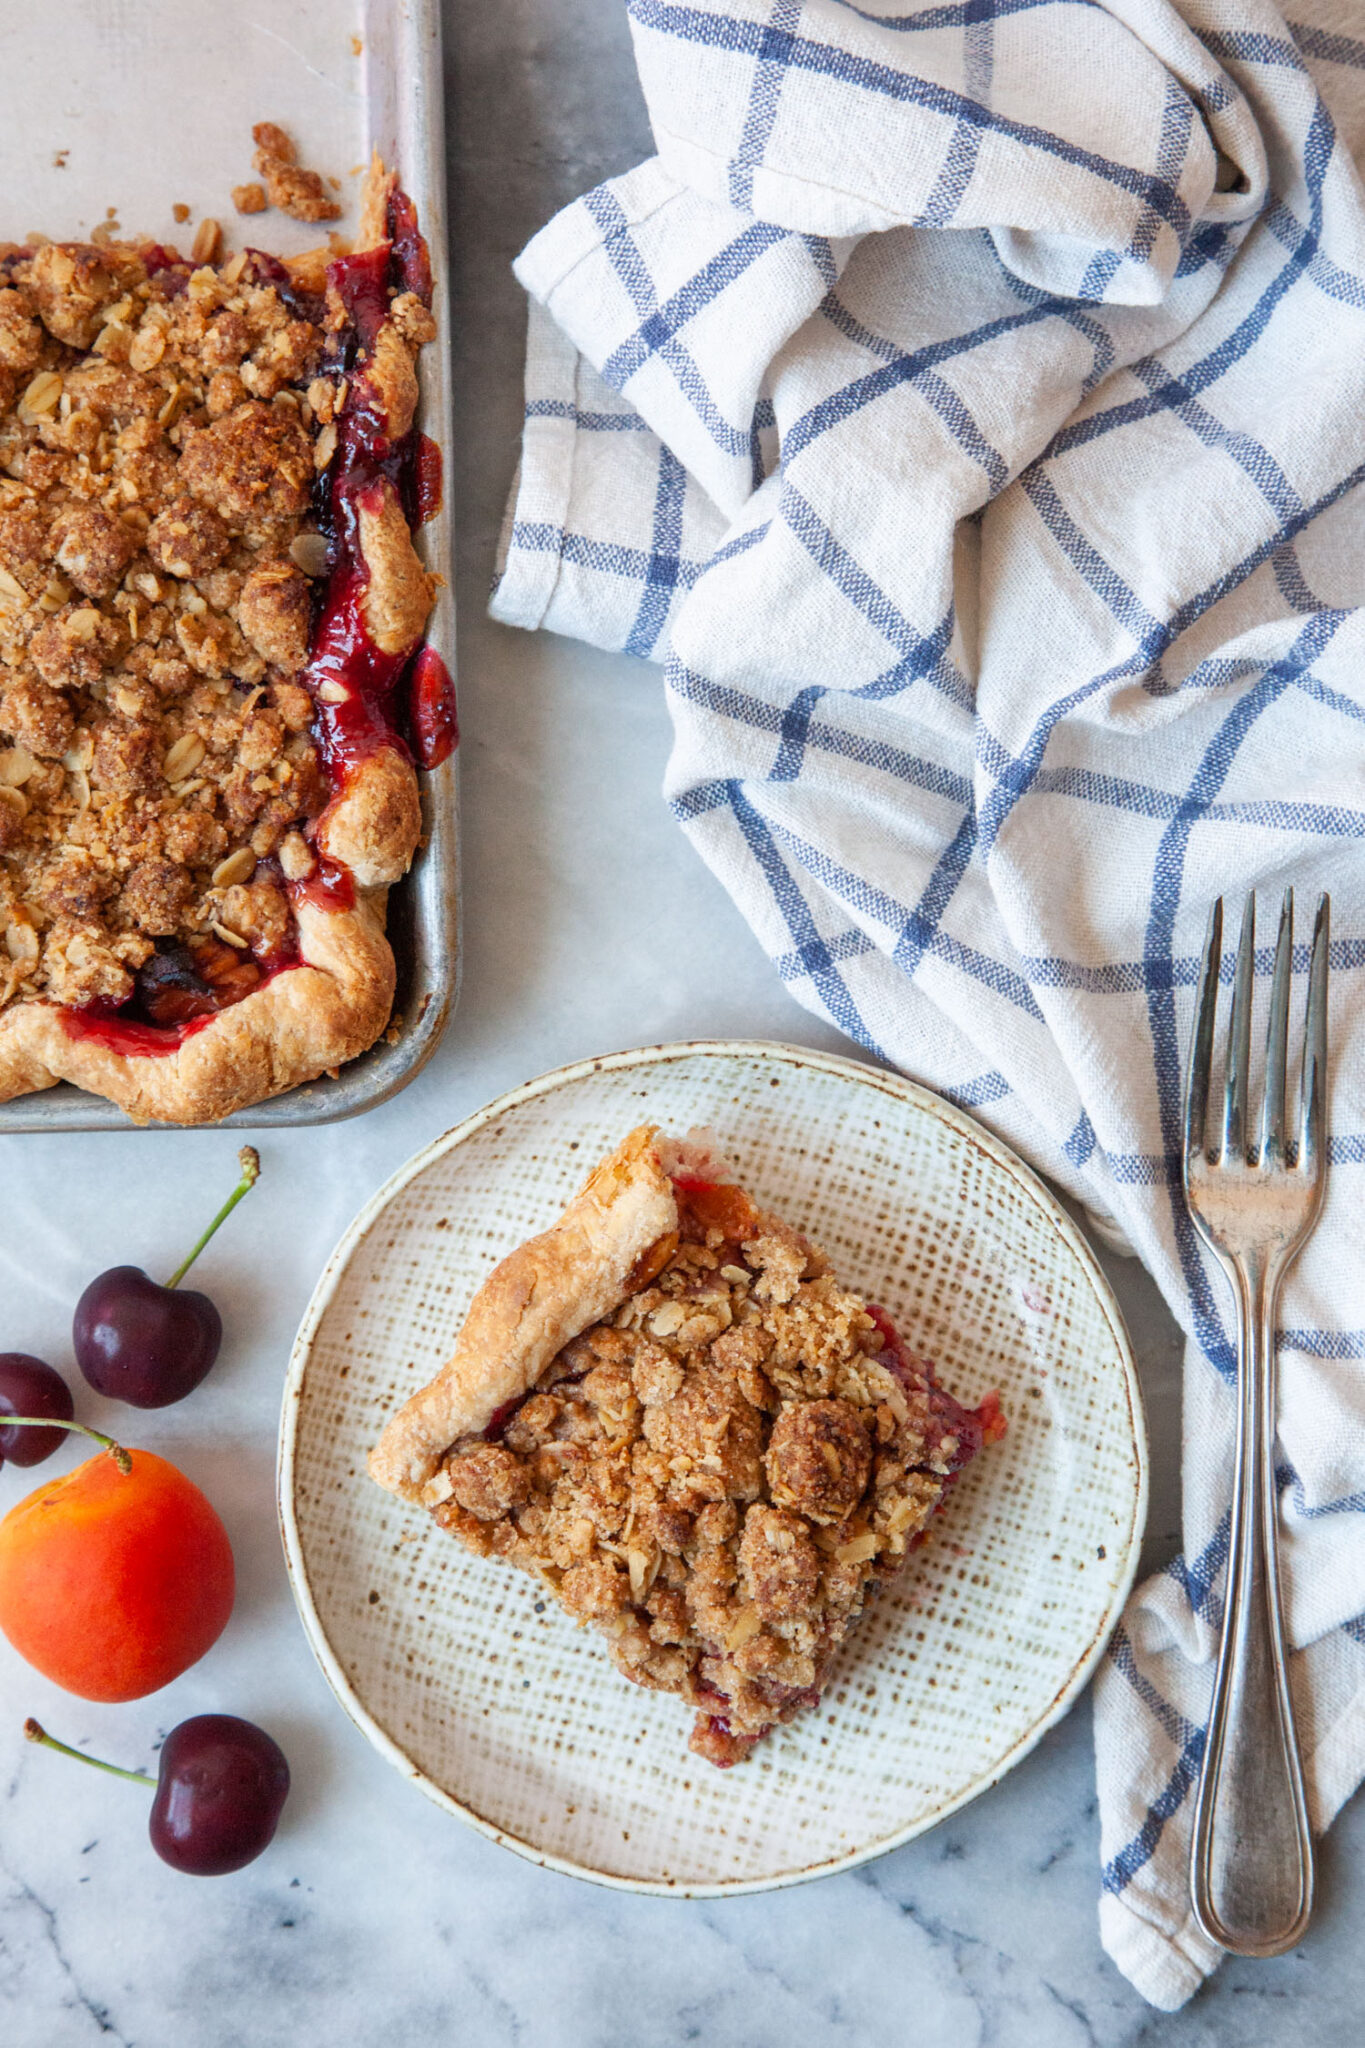 A slice of apricot cherry slab pie on a plate, with the remaining slab pie next to it. There are fresh cherries and an apricot next tot he plate, along with a blue lined cloth napkin.